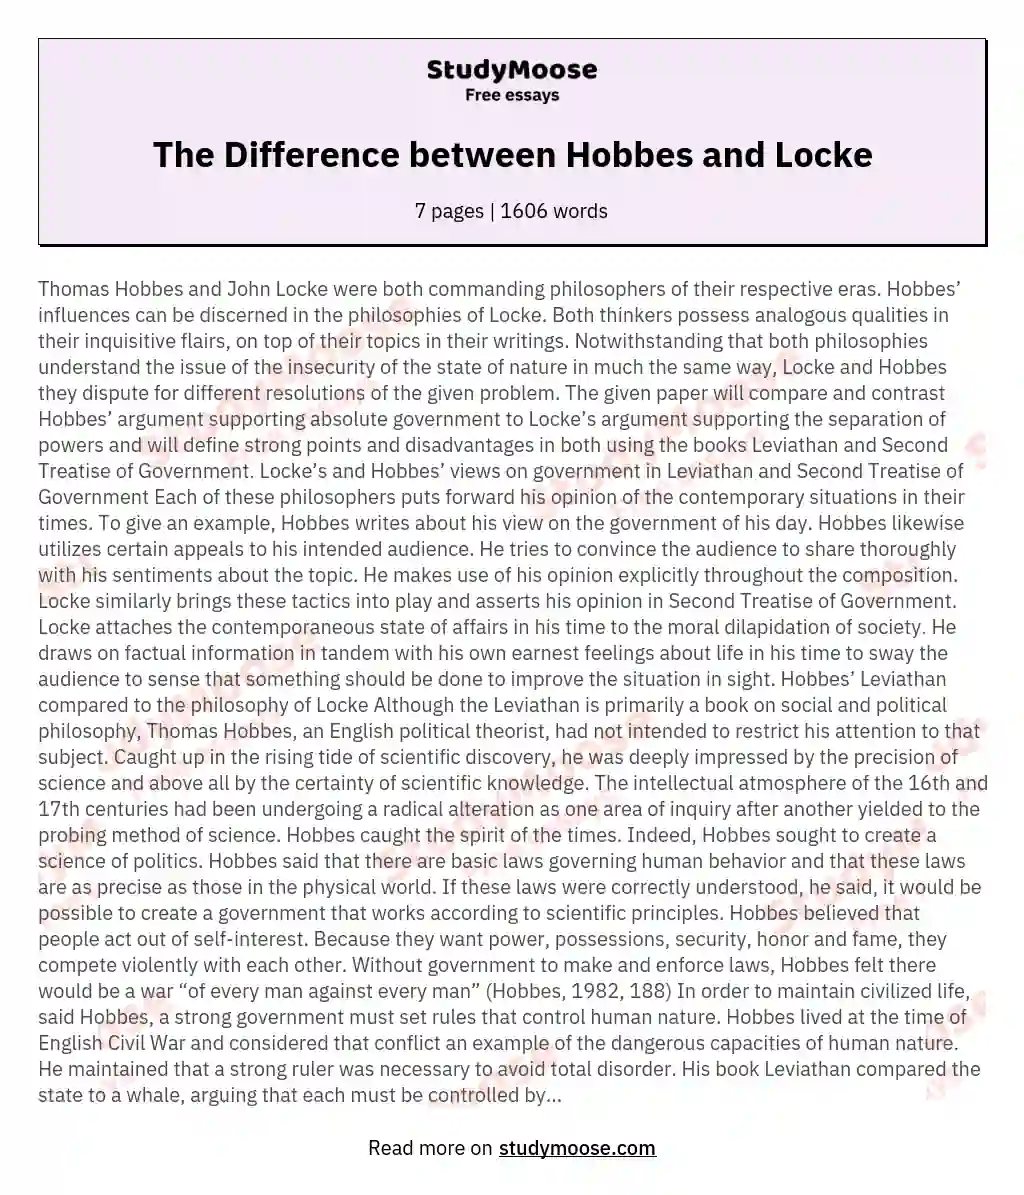 The Difference between Hobbes and Locke